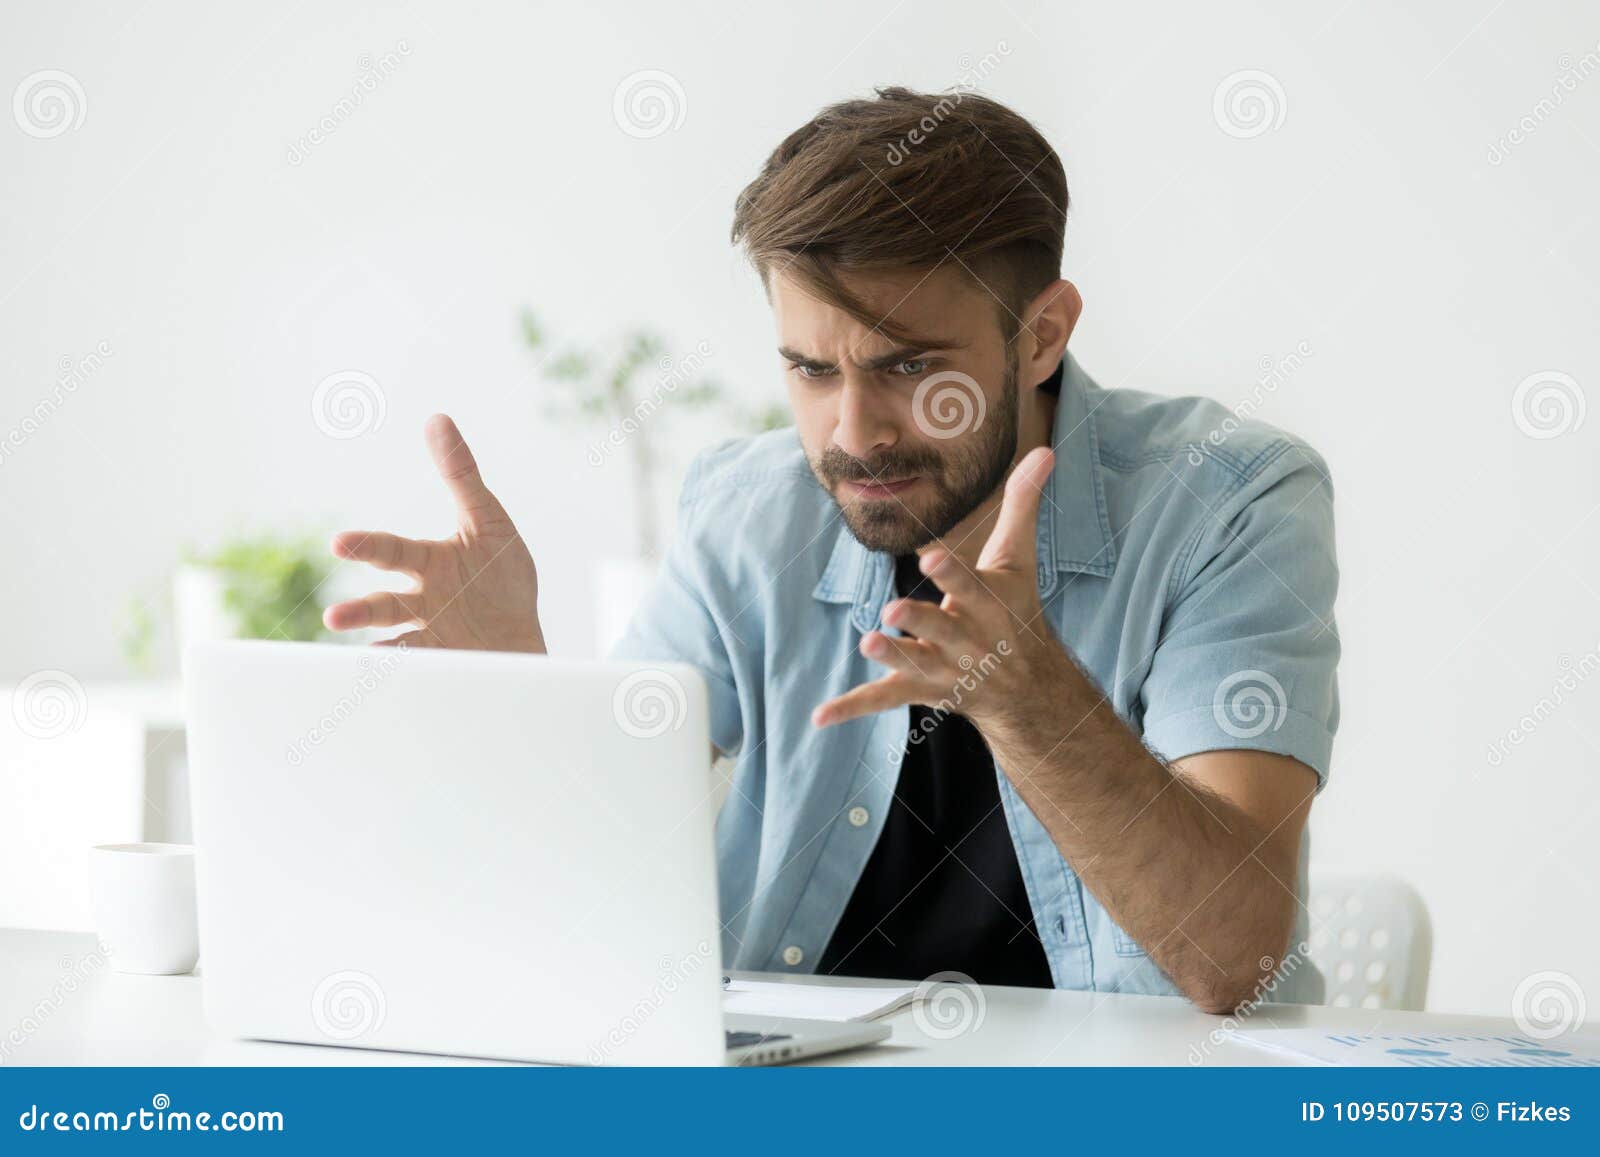 angry man disagree with fake online news looking at laptop